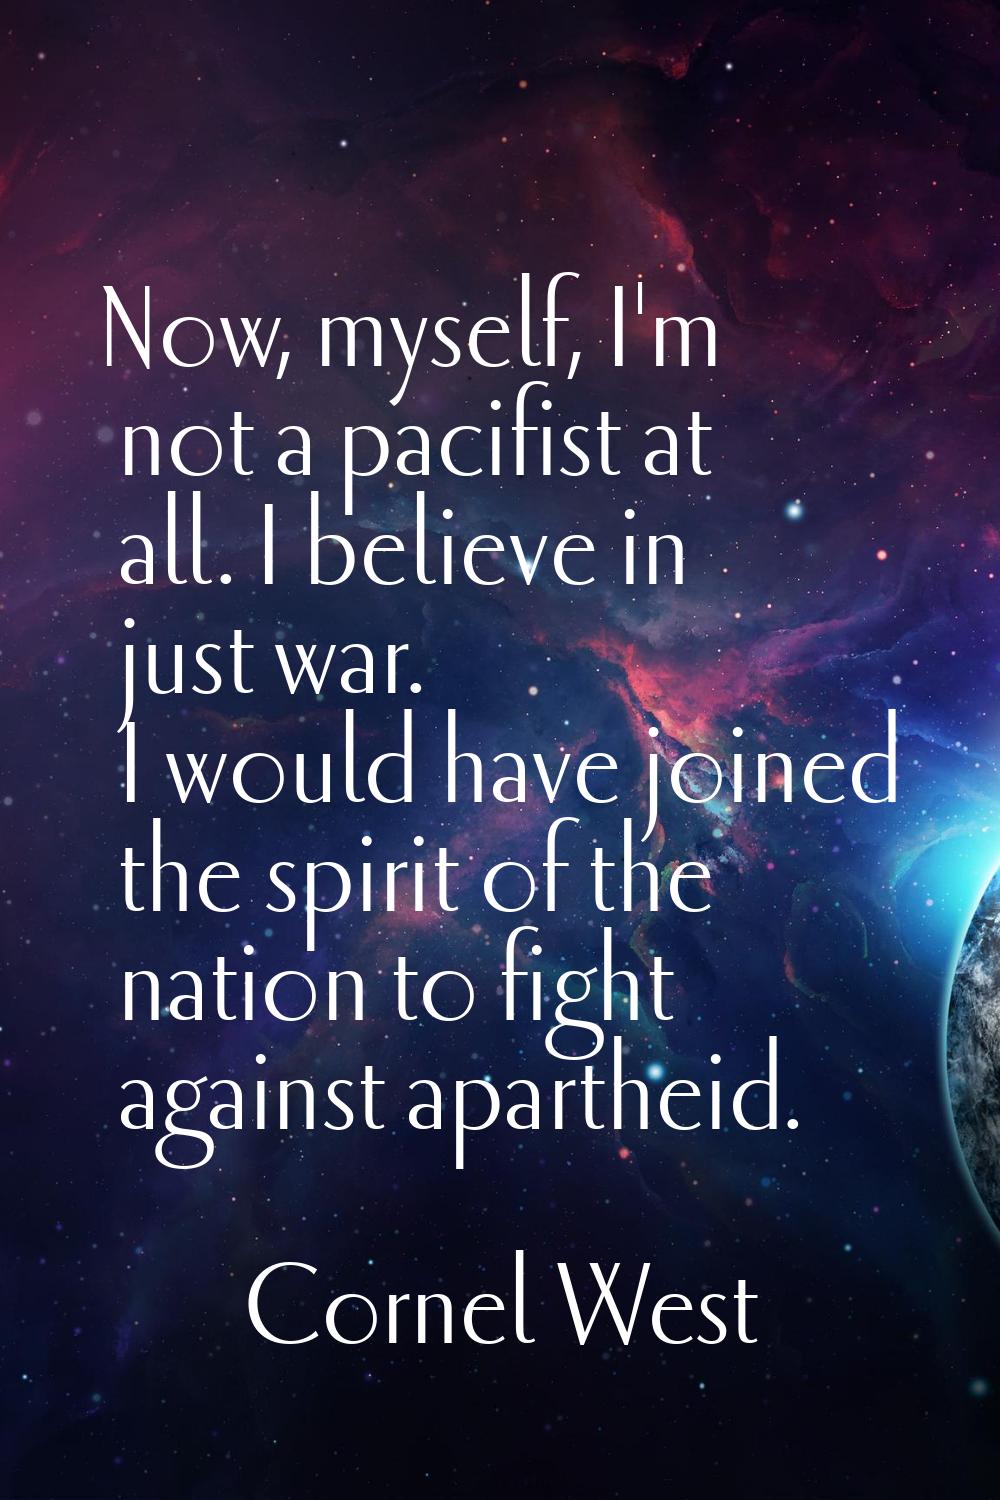 Now, myself, I'm not a pacifist at all. I believe in just war. I would have joined the spirit of th